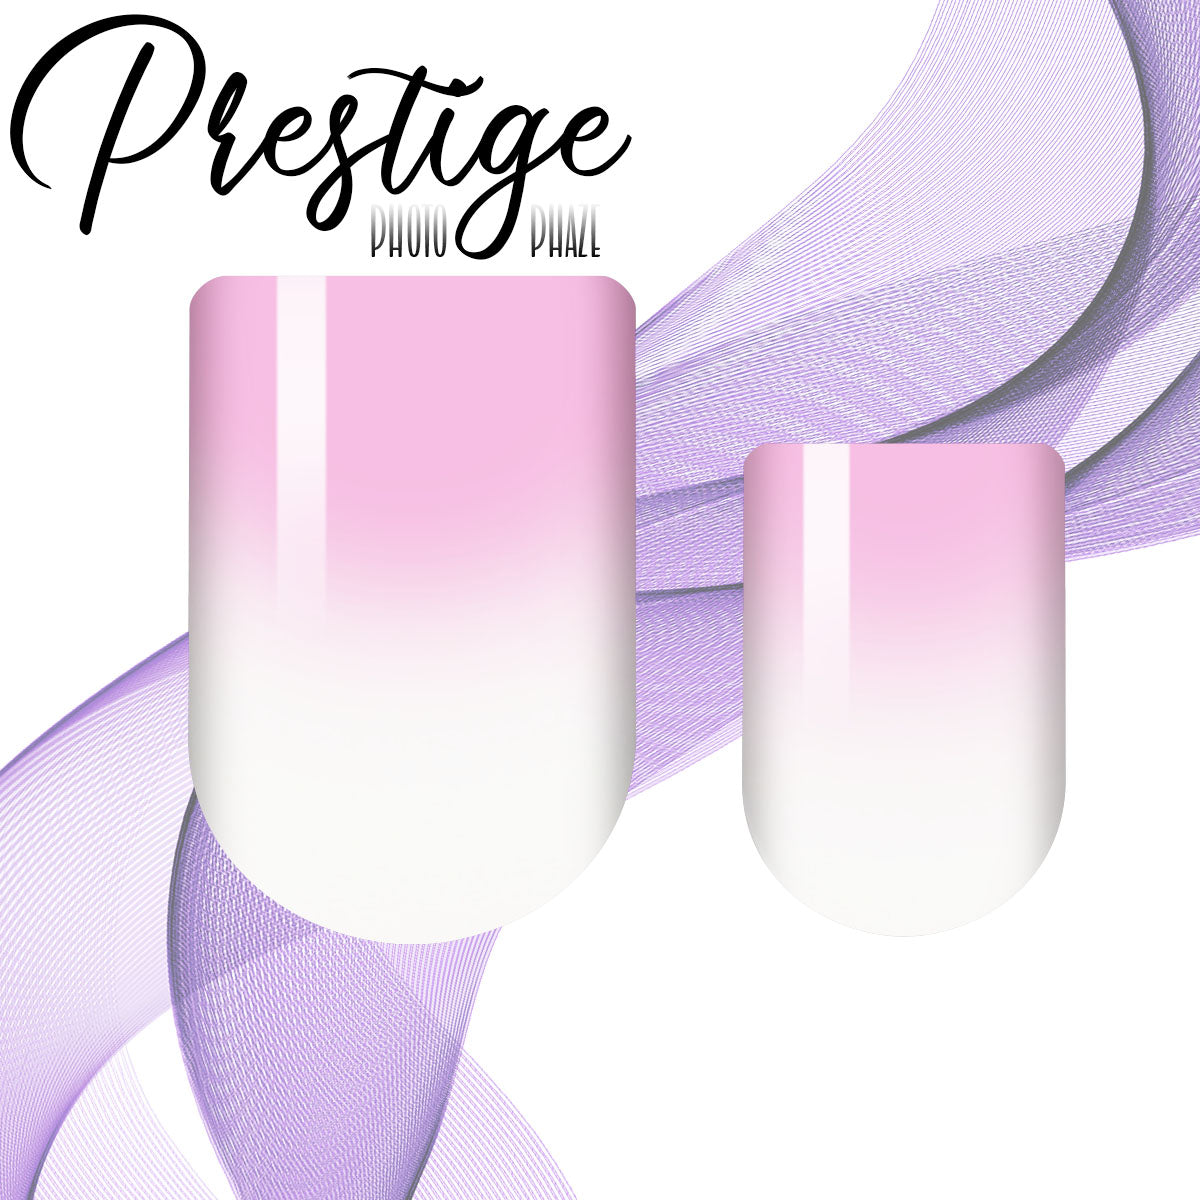 A Touch Of Rouge Prestige Photo Phaze Nail Wrap